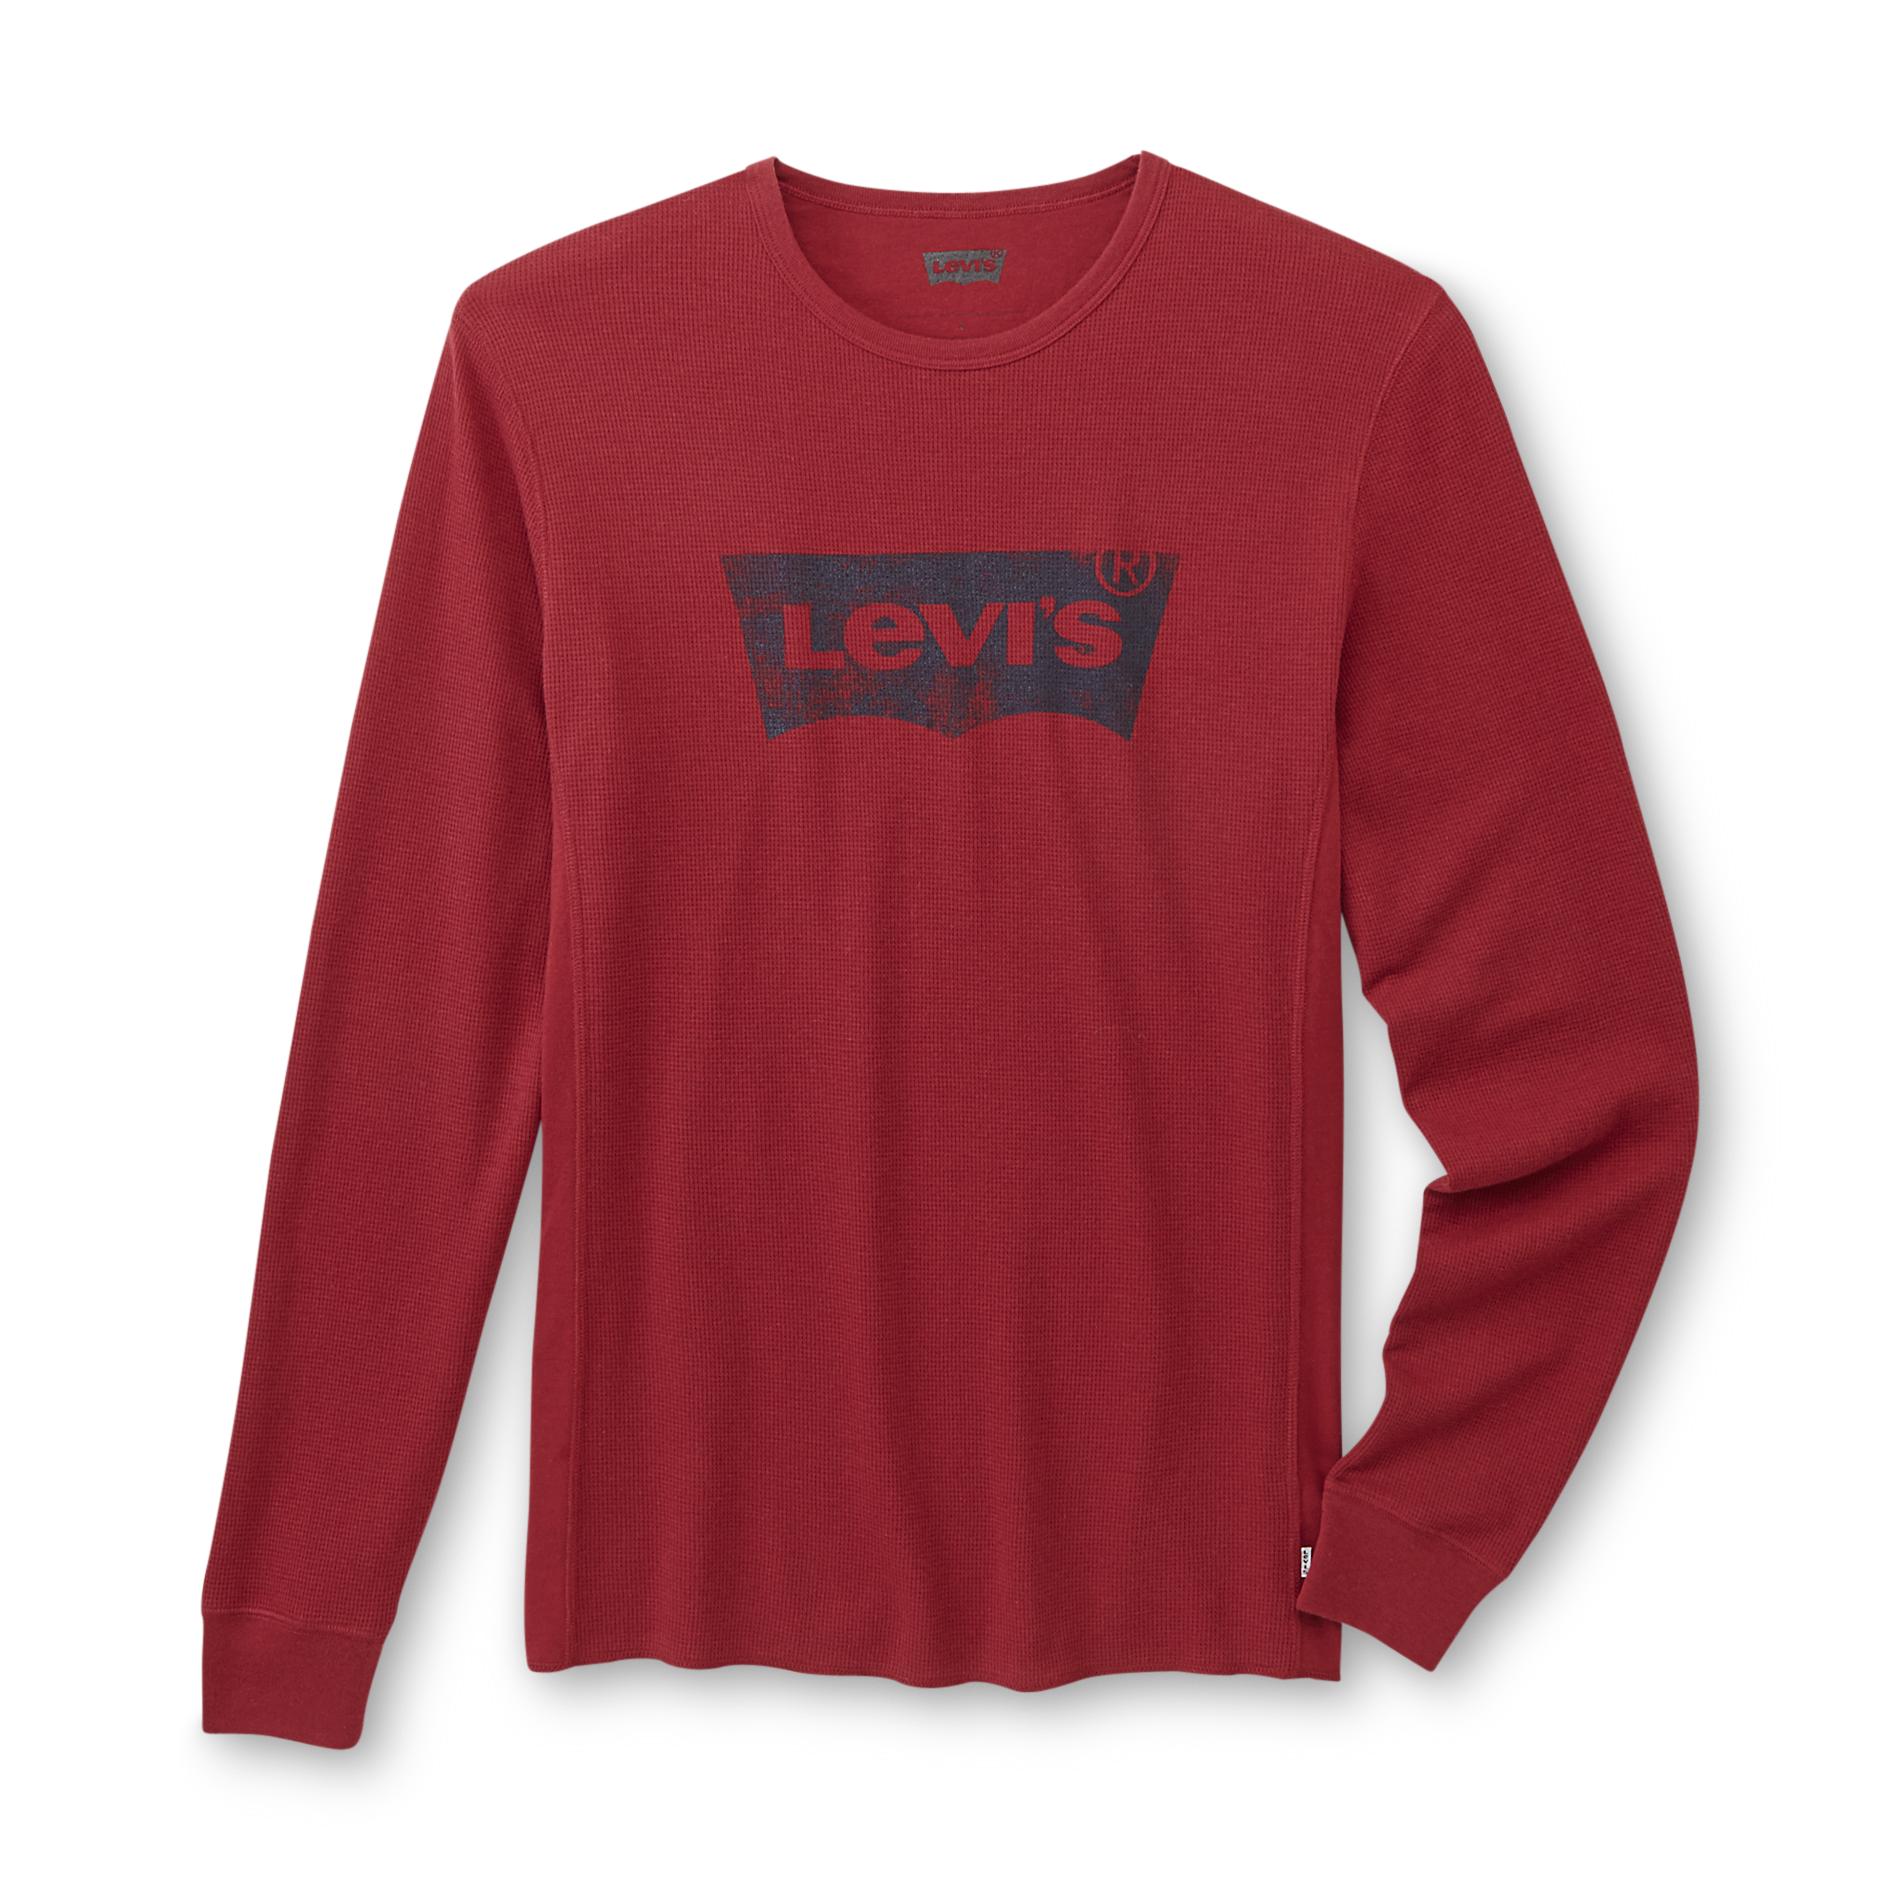 Levi's Men's Graphic Thermal Shirt